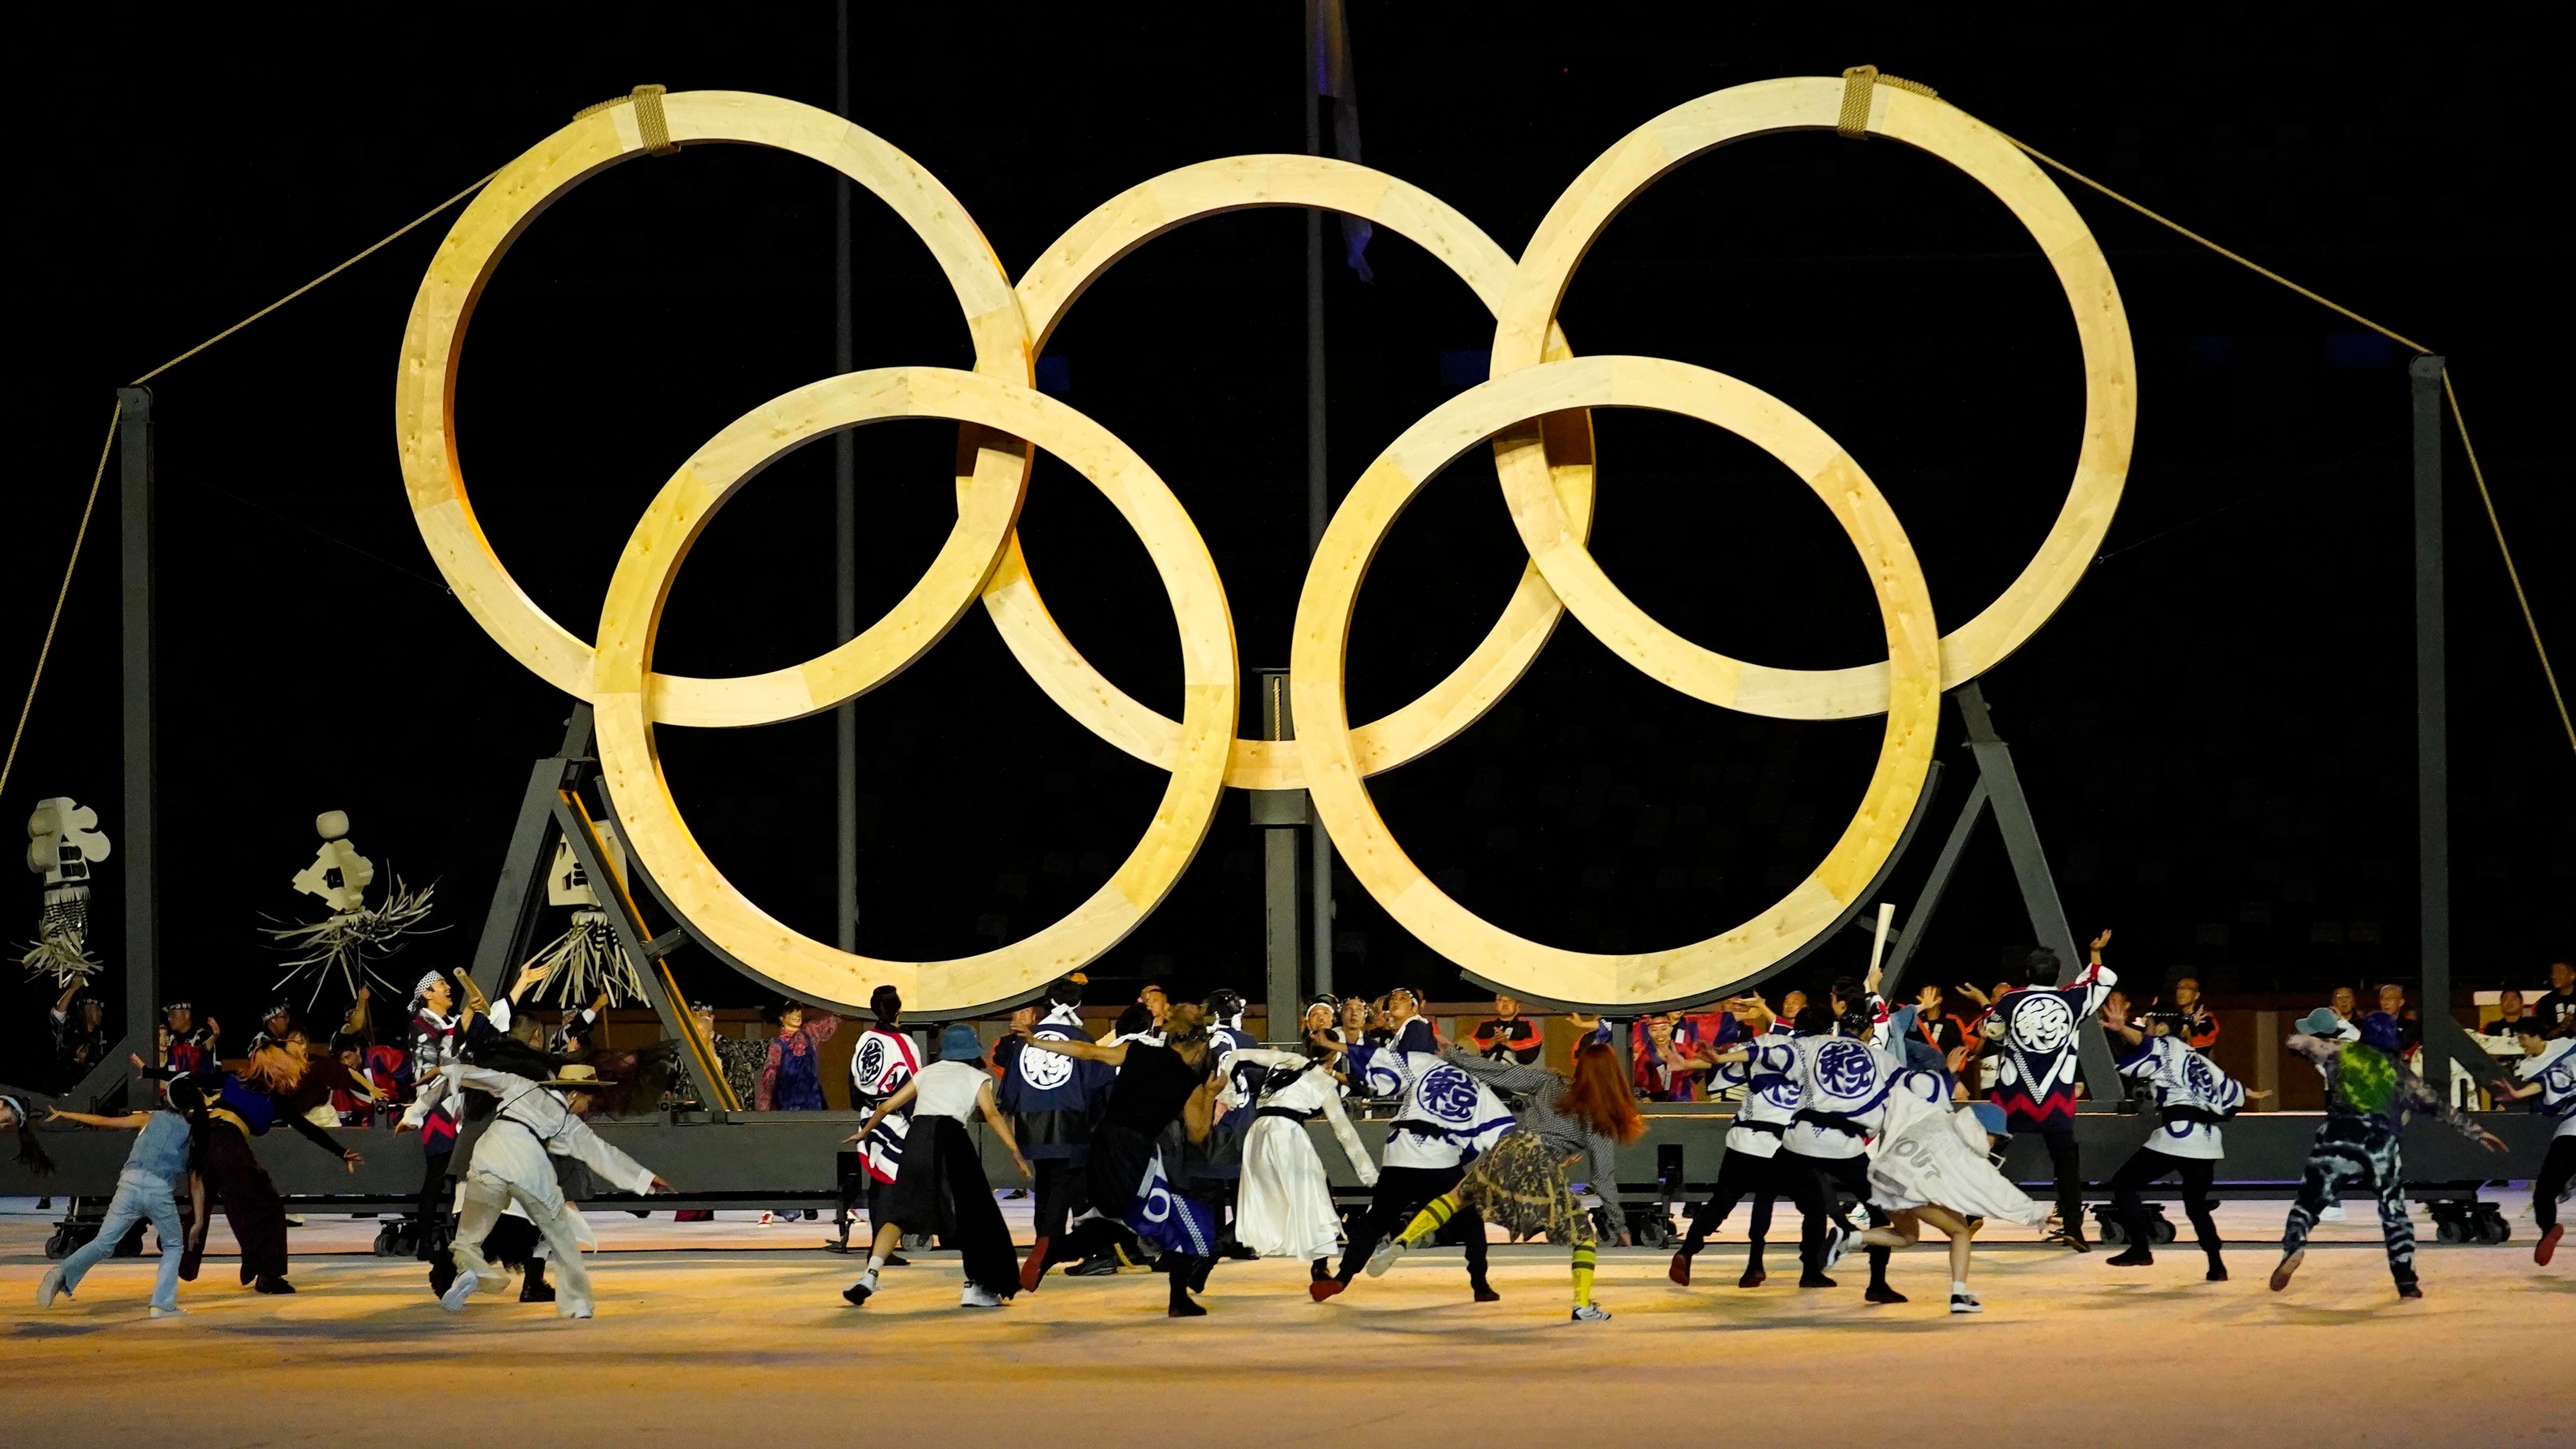 See the Best Pictures From the 2020 Tokyo Olympics Opening Ceremony